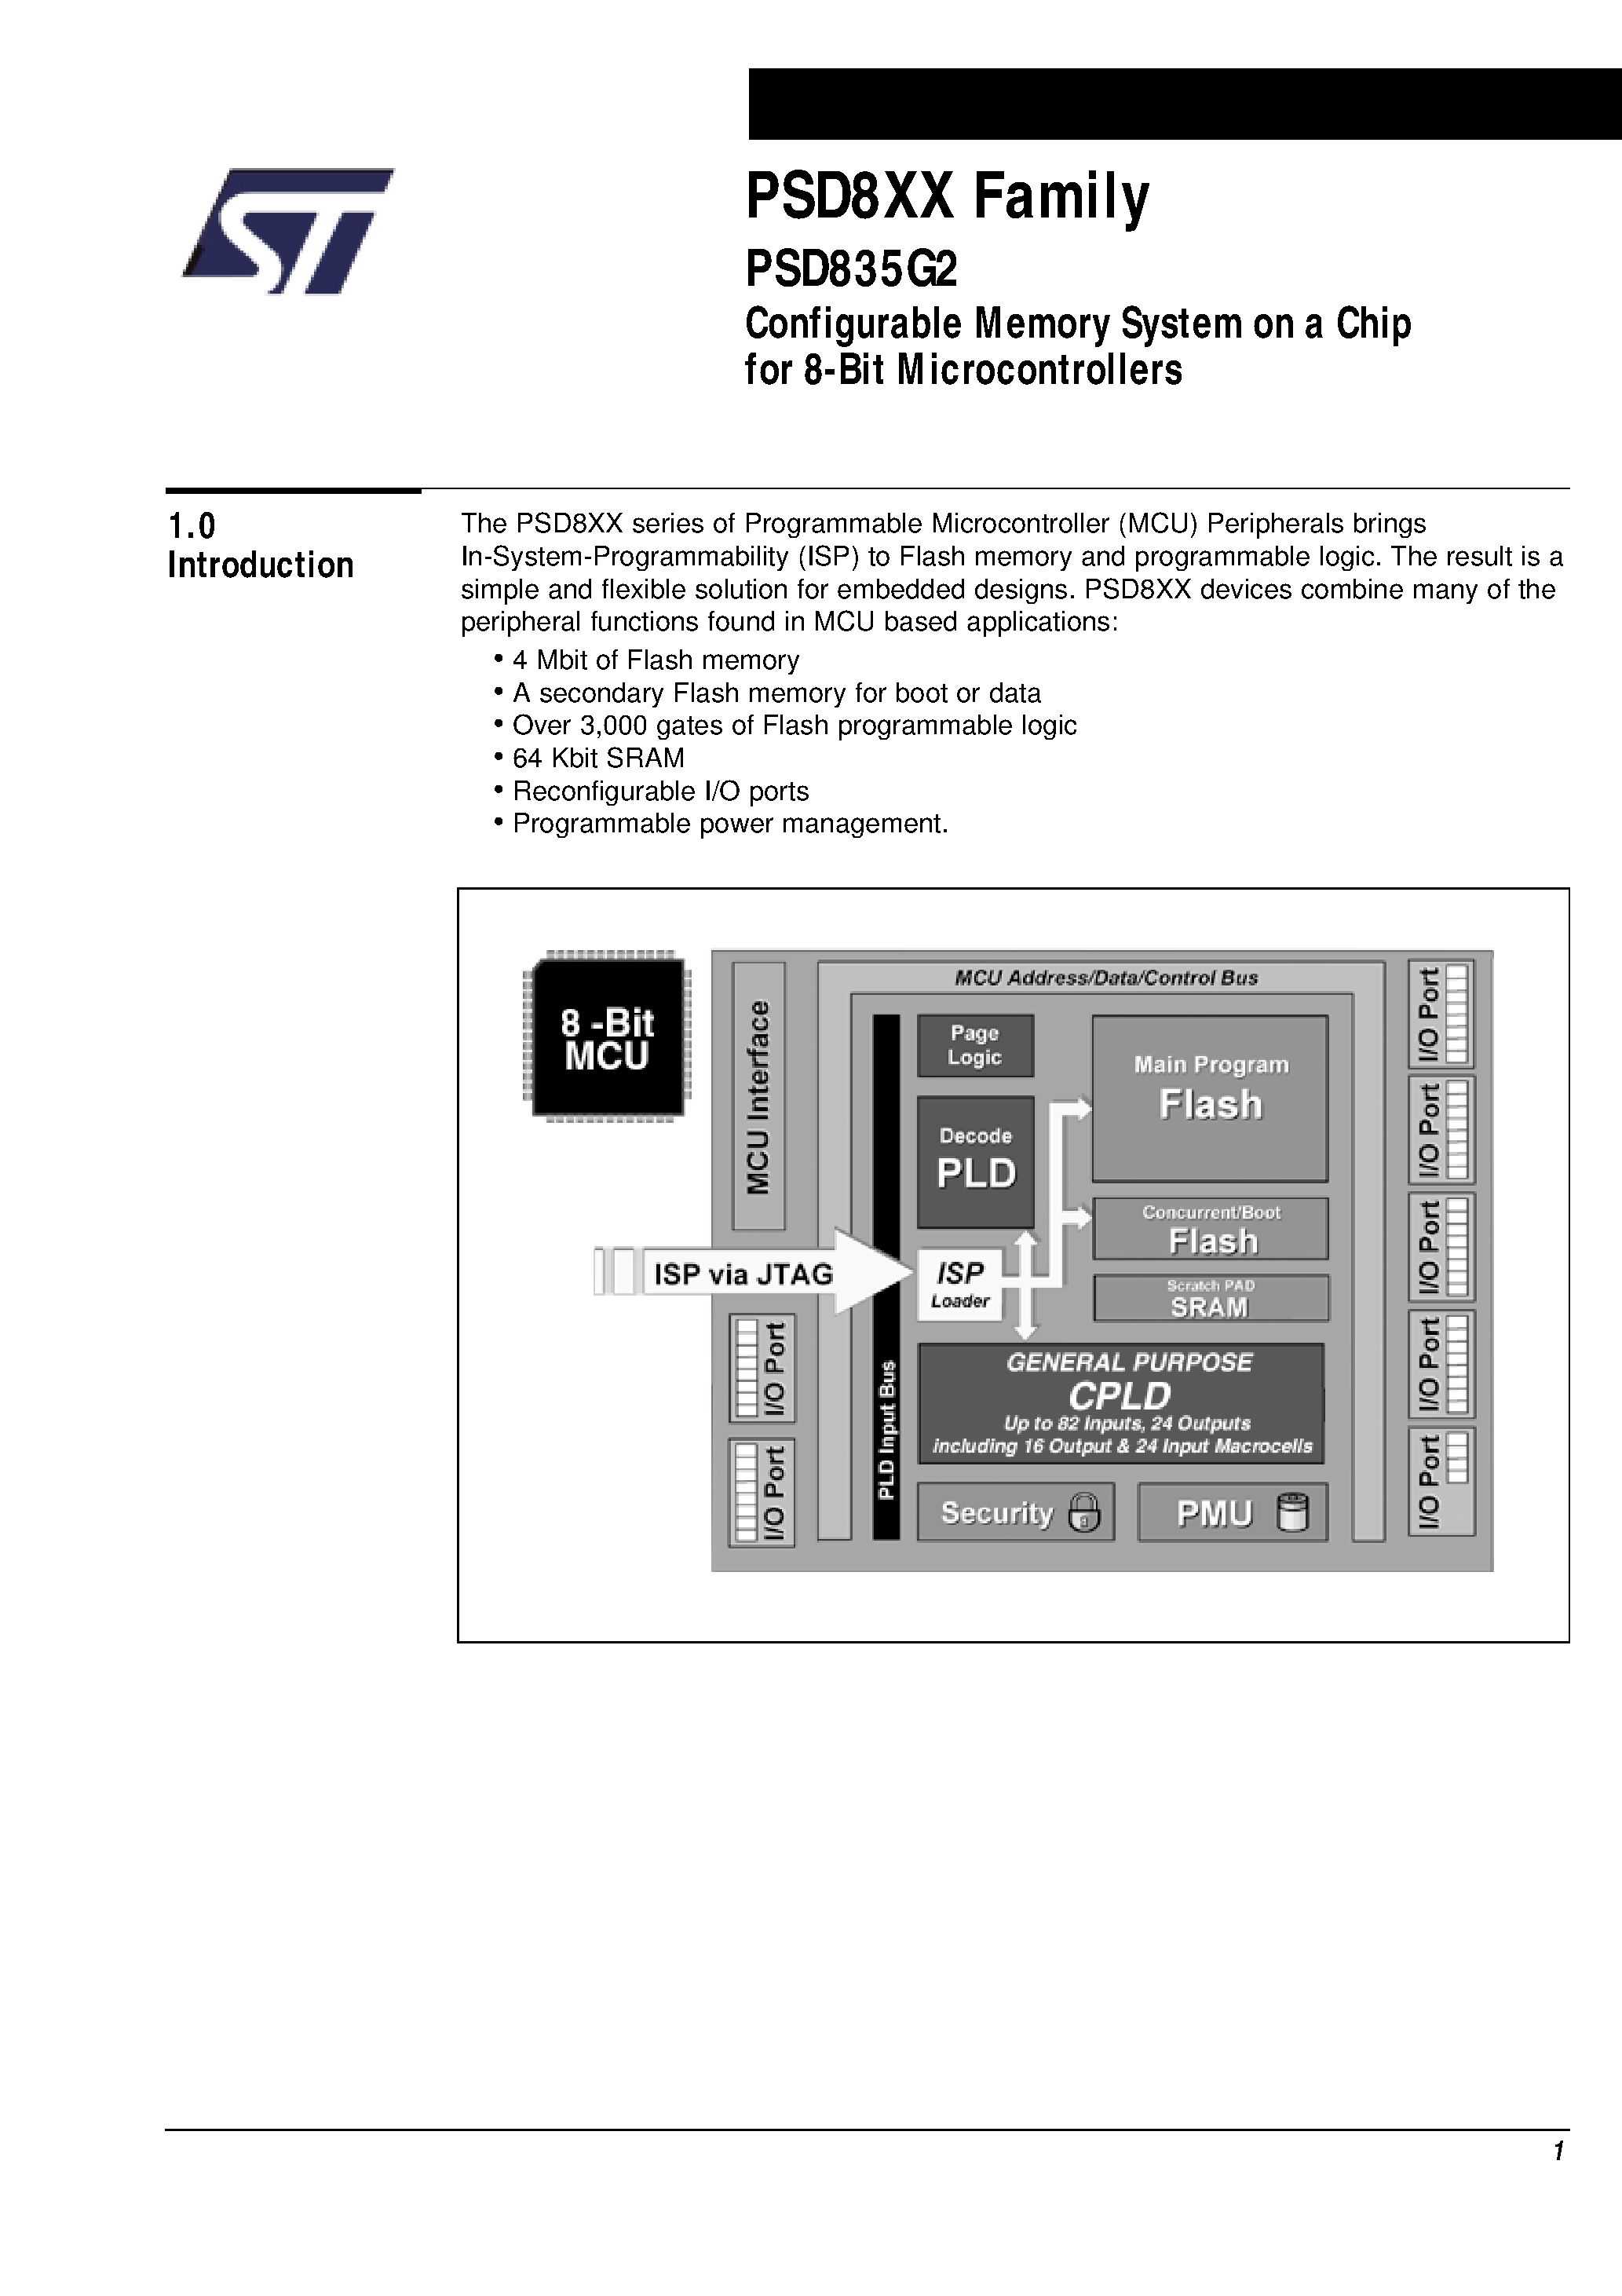 Datasheet PSD835F2-A-90MI - Configurable Memory System on a Chip for 8-Bit Microcontrollers page 2